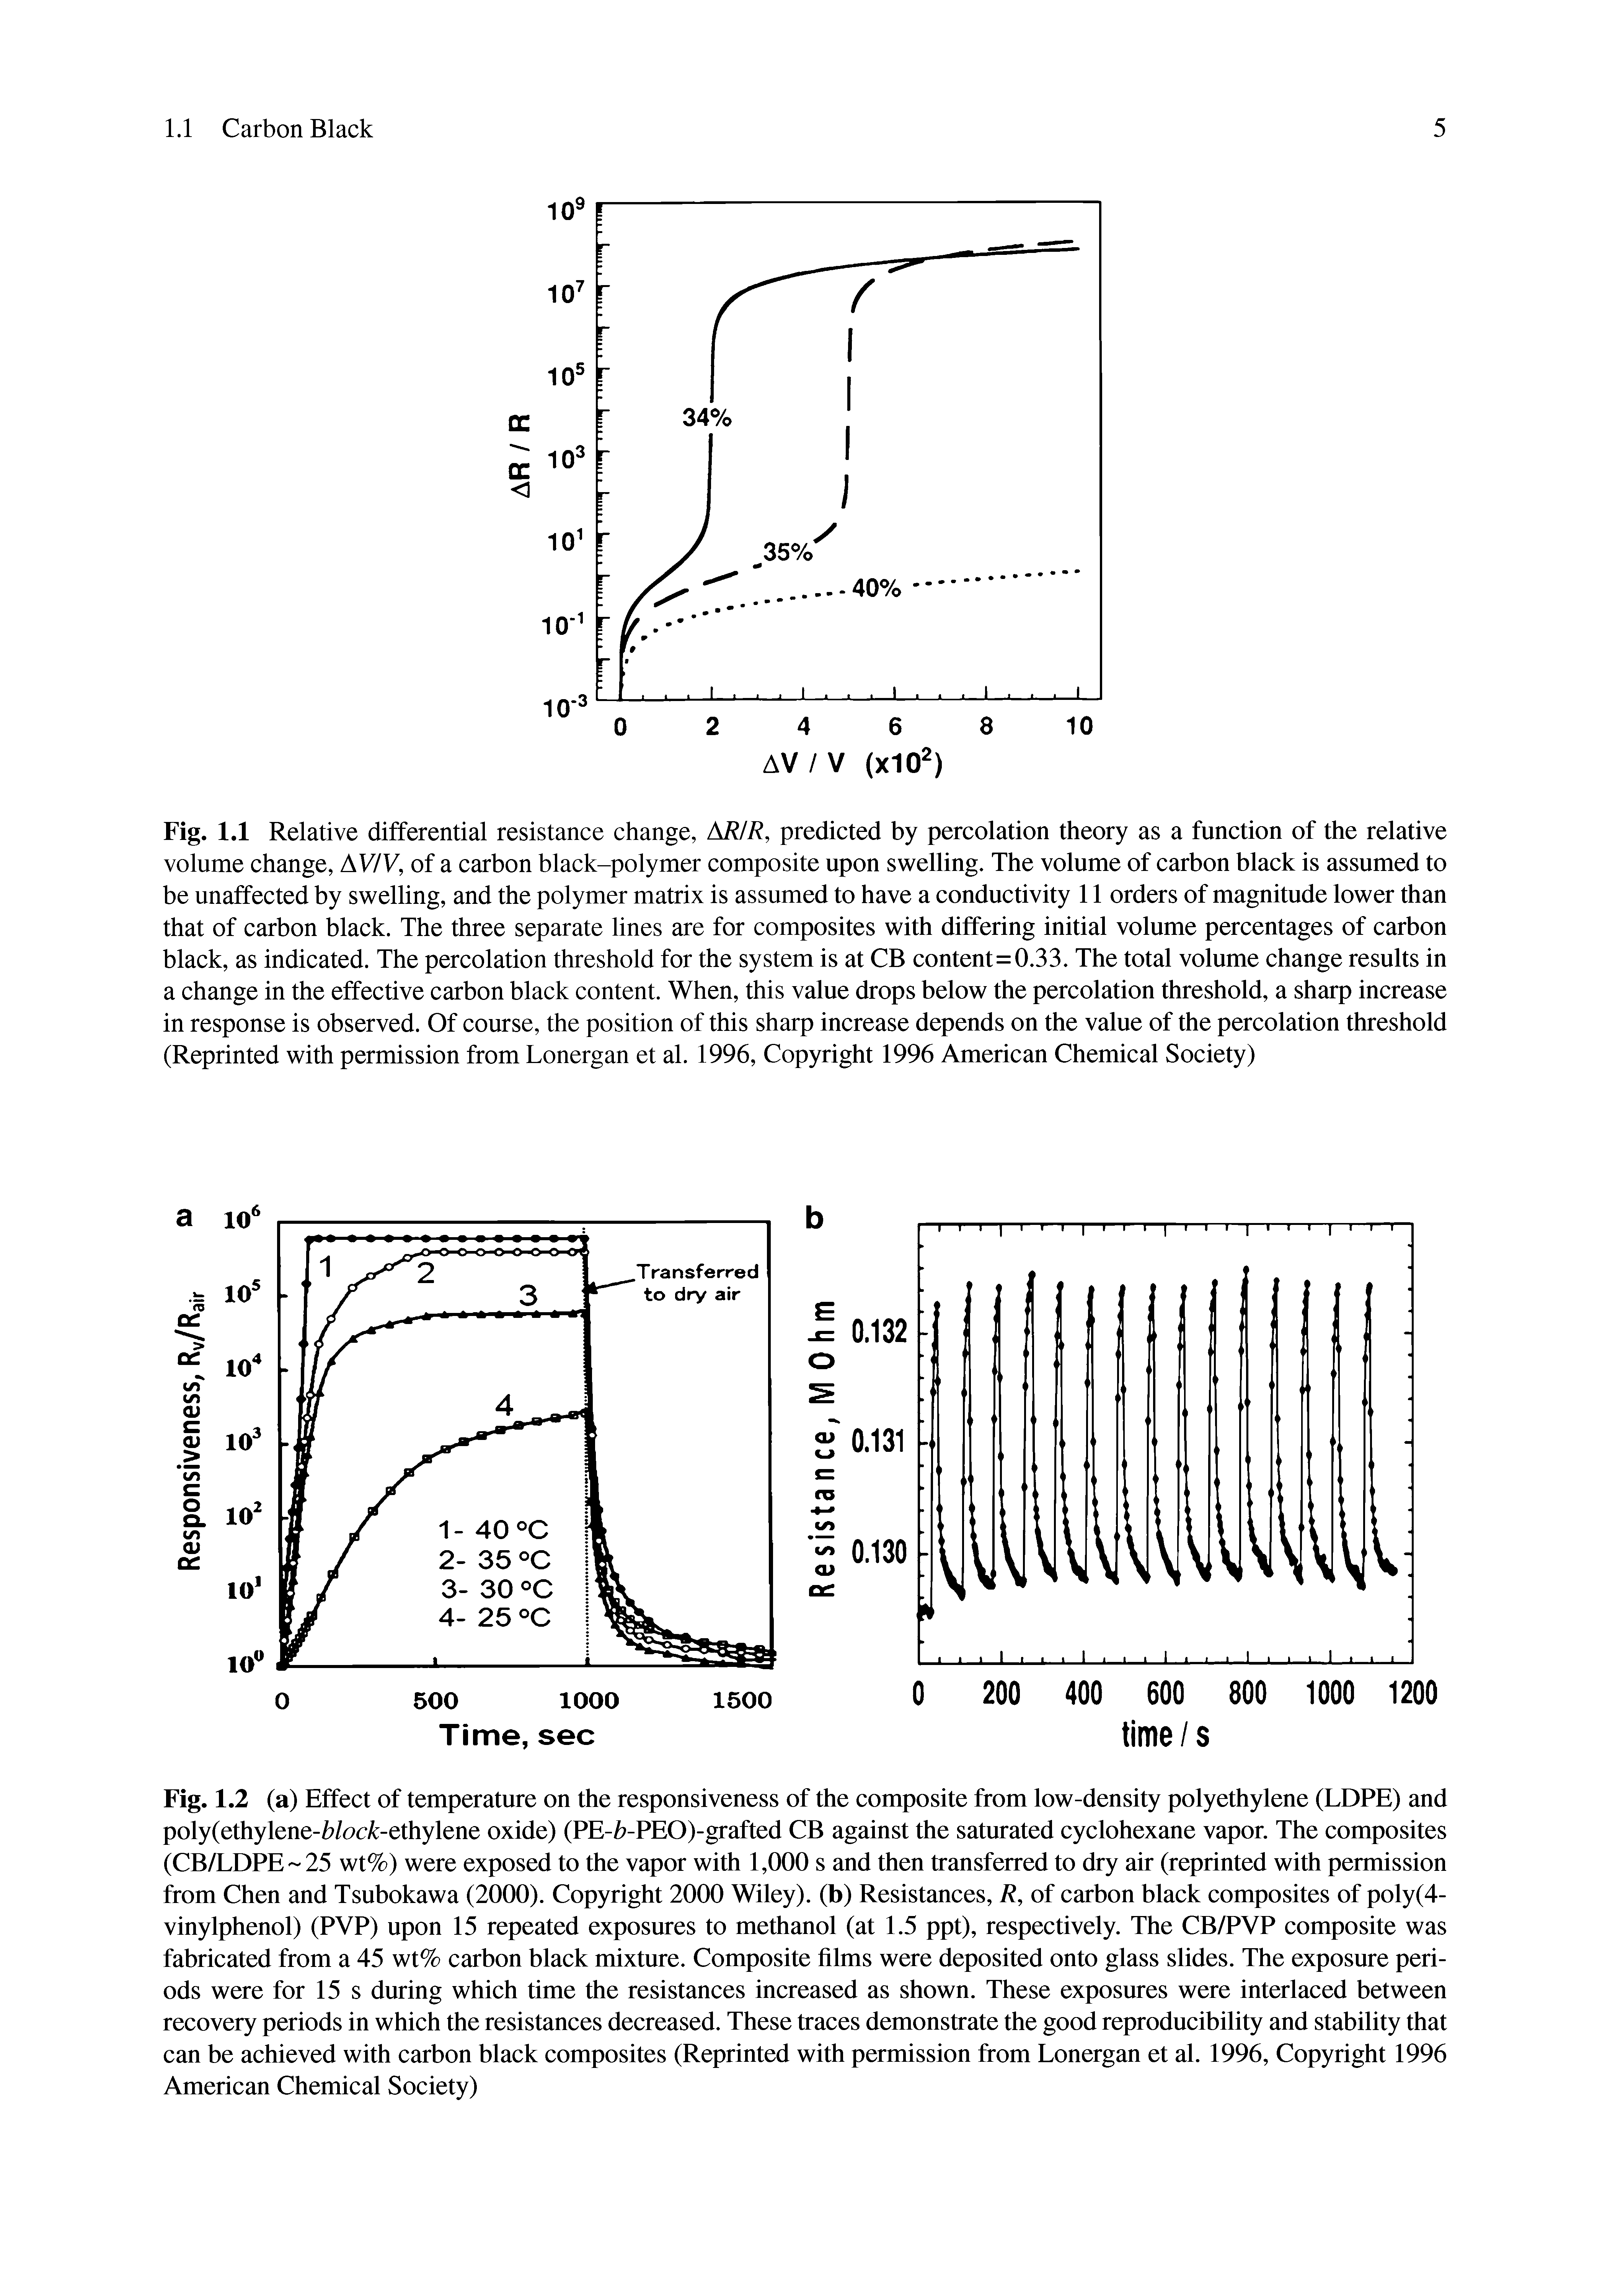 Fig. 1.1 Relative differential resistance change, AR/R, predicted by percolation theory as a function of the relative volume change, AV/V, of a carbon black-polymer composite upon swelling. The volume of carbon black is assumed to be unaffected by swelling, and the polymer matrix is assumed to have a conductivity 11 orders of magnitude lower than that of carbon black. The three separate lines are for composites with differing initial volume percentages of carbon black, as indicated. The percolation threshold for the system is at CB content=0.33. The total volume change results in a change in the effective carbon black content. When, this value drops below the percolation threshold, a sharp increase in response is observed. Of course, the position of this sharp increase depends on the value of the percolation threshold (Reprinted with permission from Lonergan et al. 1996, Copyright 1996 American Chemical Society)...